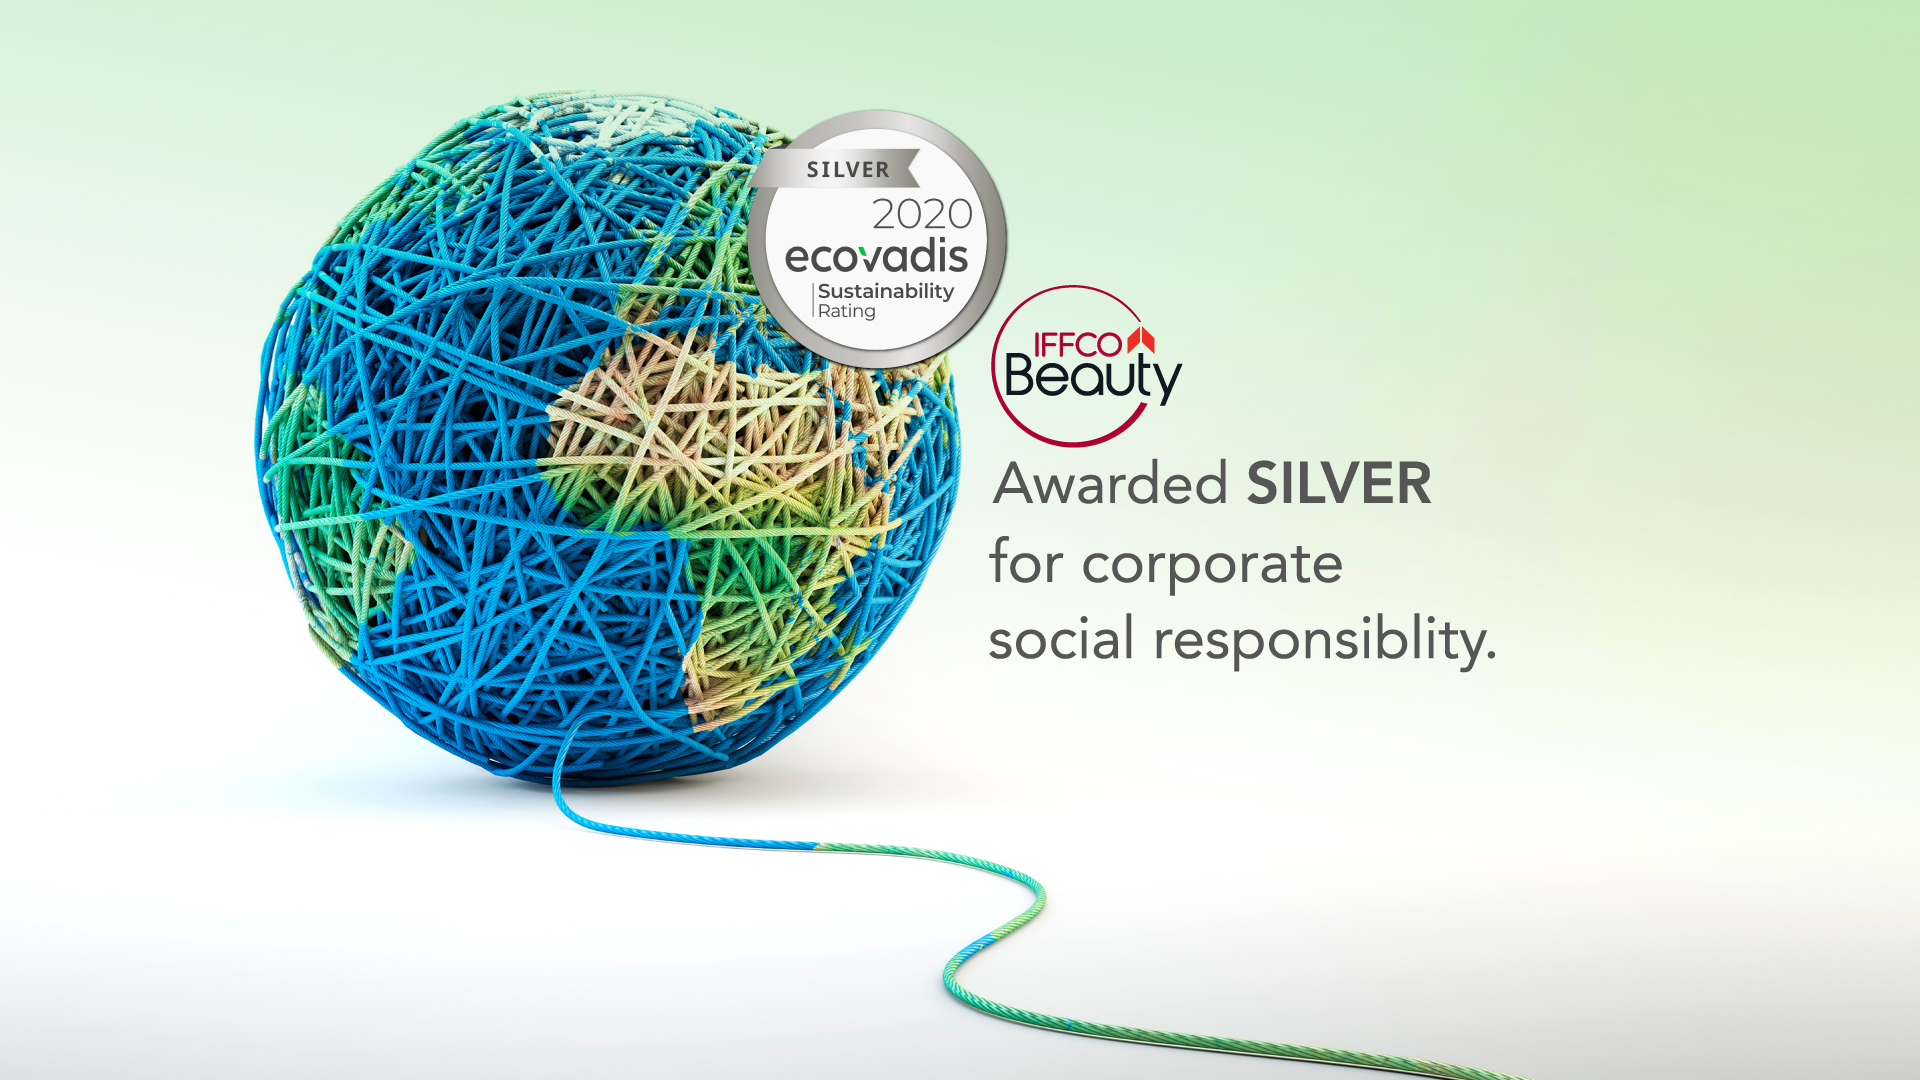 IFFCO BEAUTY wins SILVER Recognition Level for Sustainability